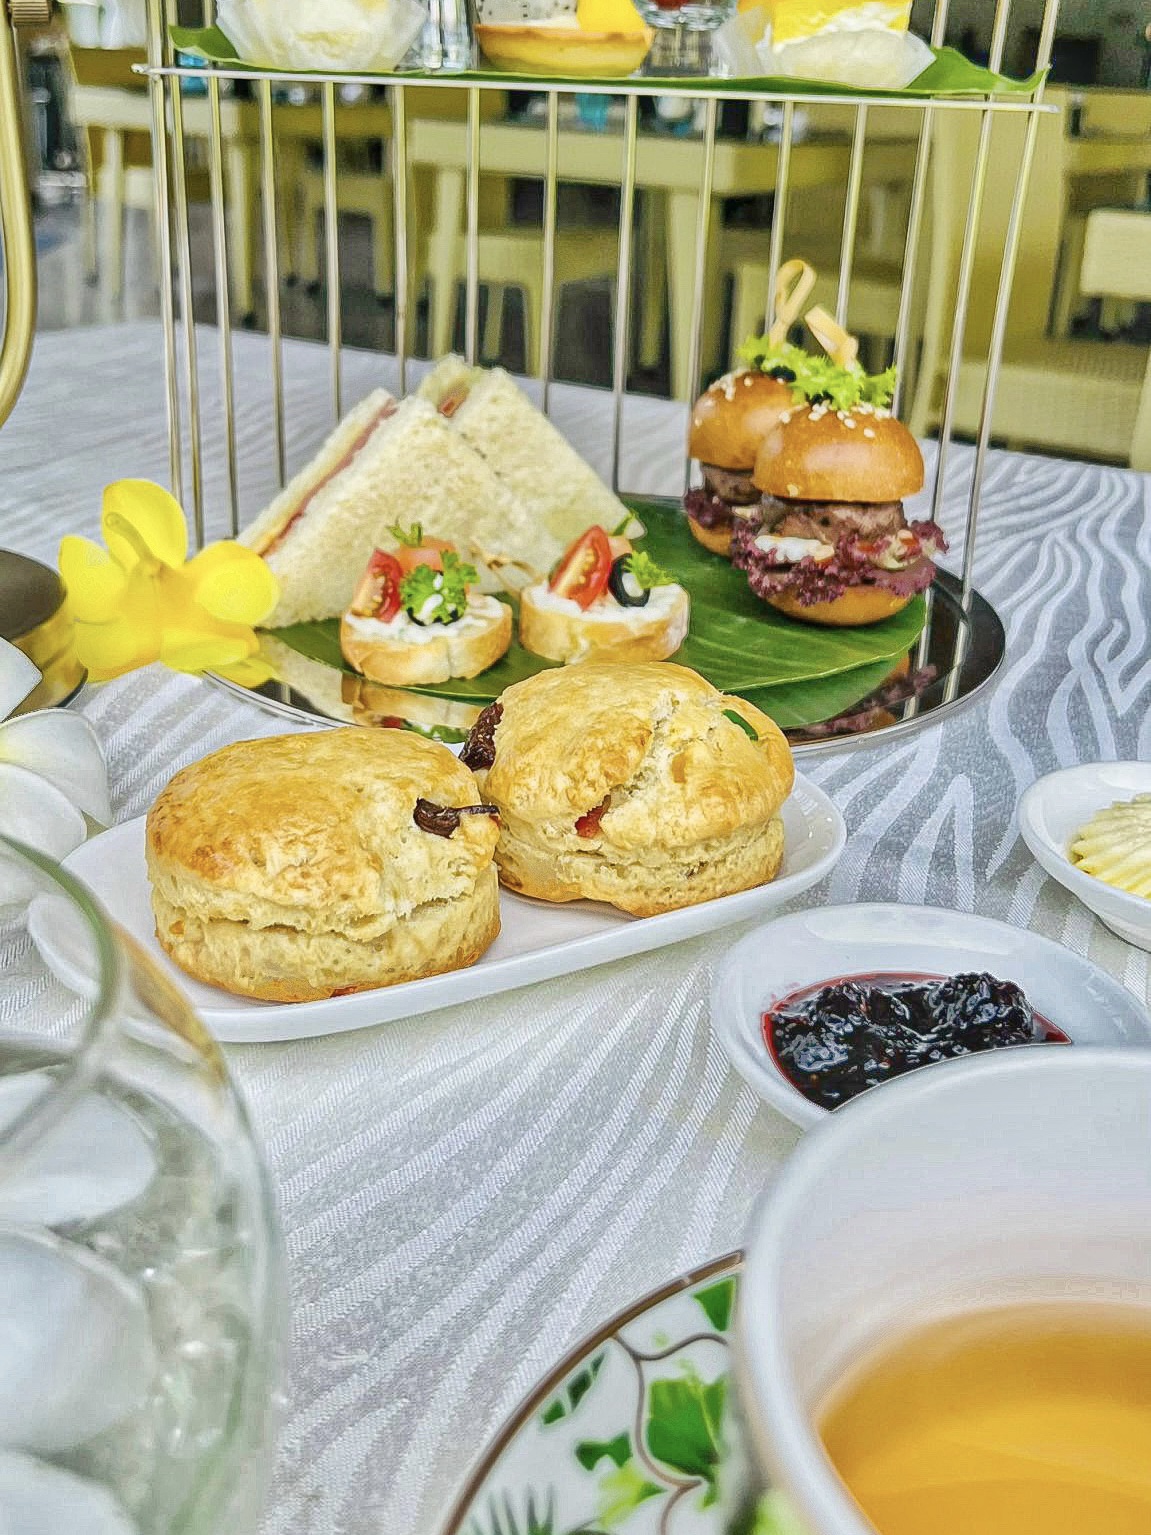 Discover resort Danang with a Japanese-style  - Afternoon tea set